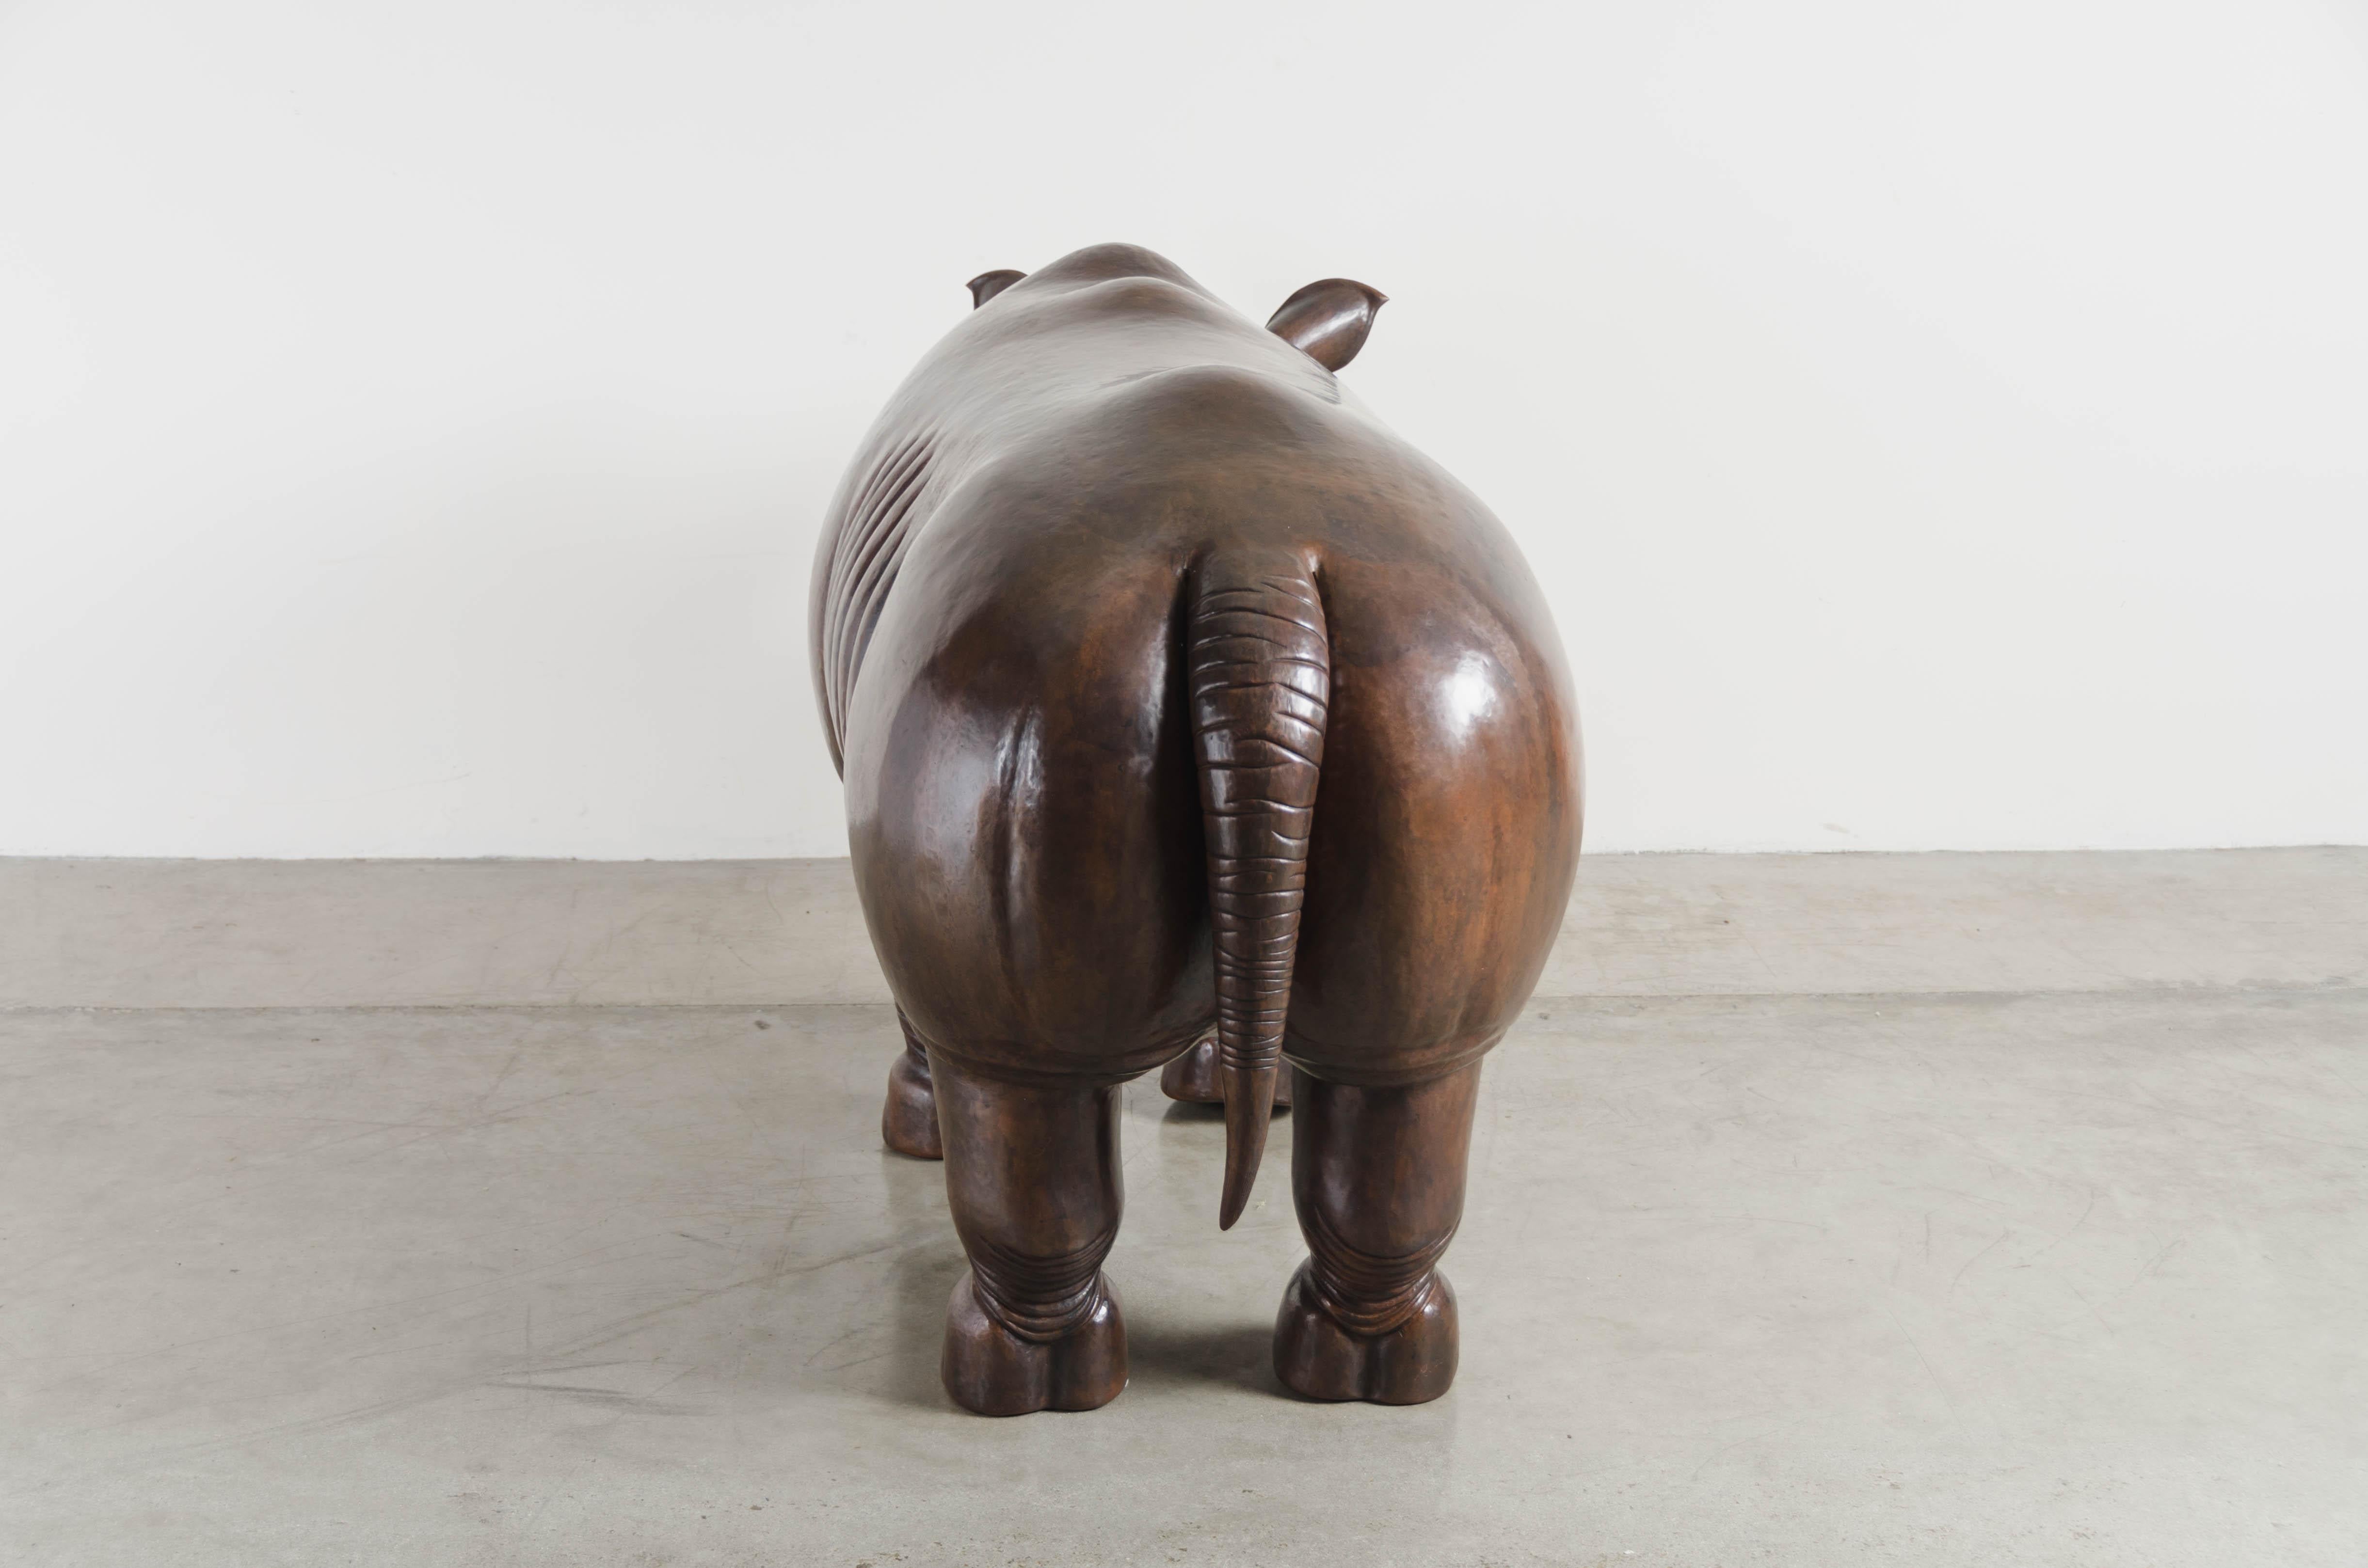 Repoussé Rhinoceros Sculpture, Antique Copper by Robert Kuo, One of a Kind For Sale